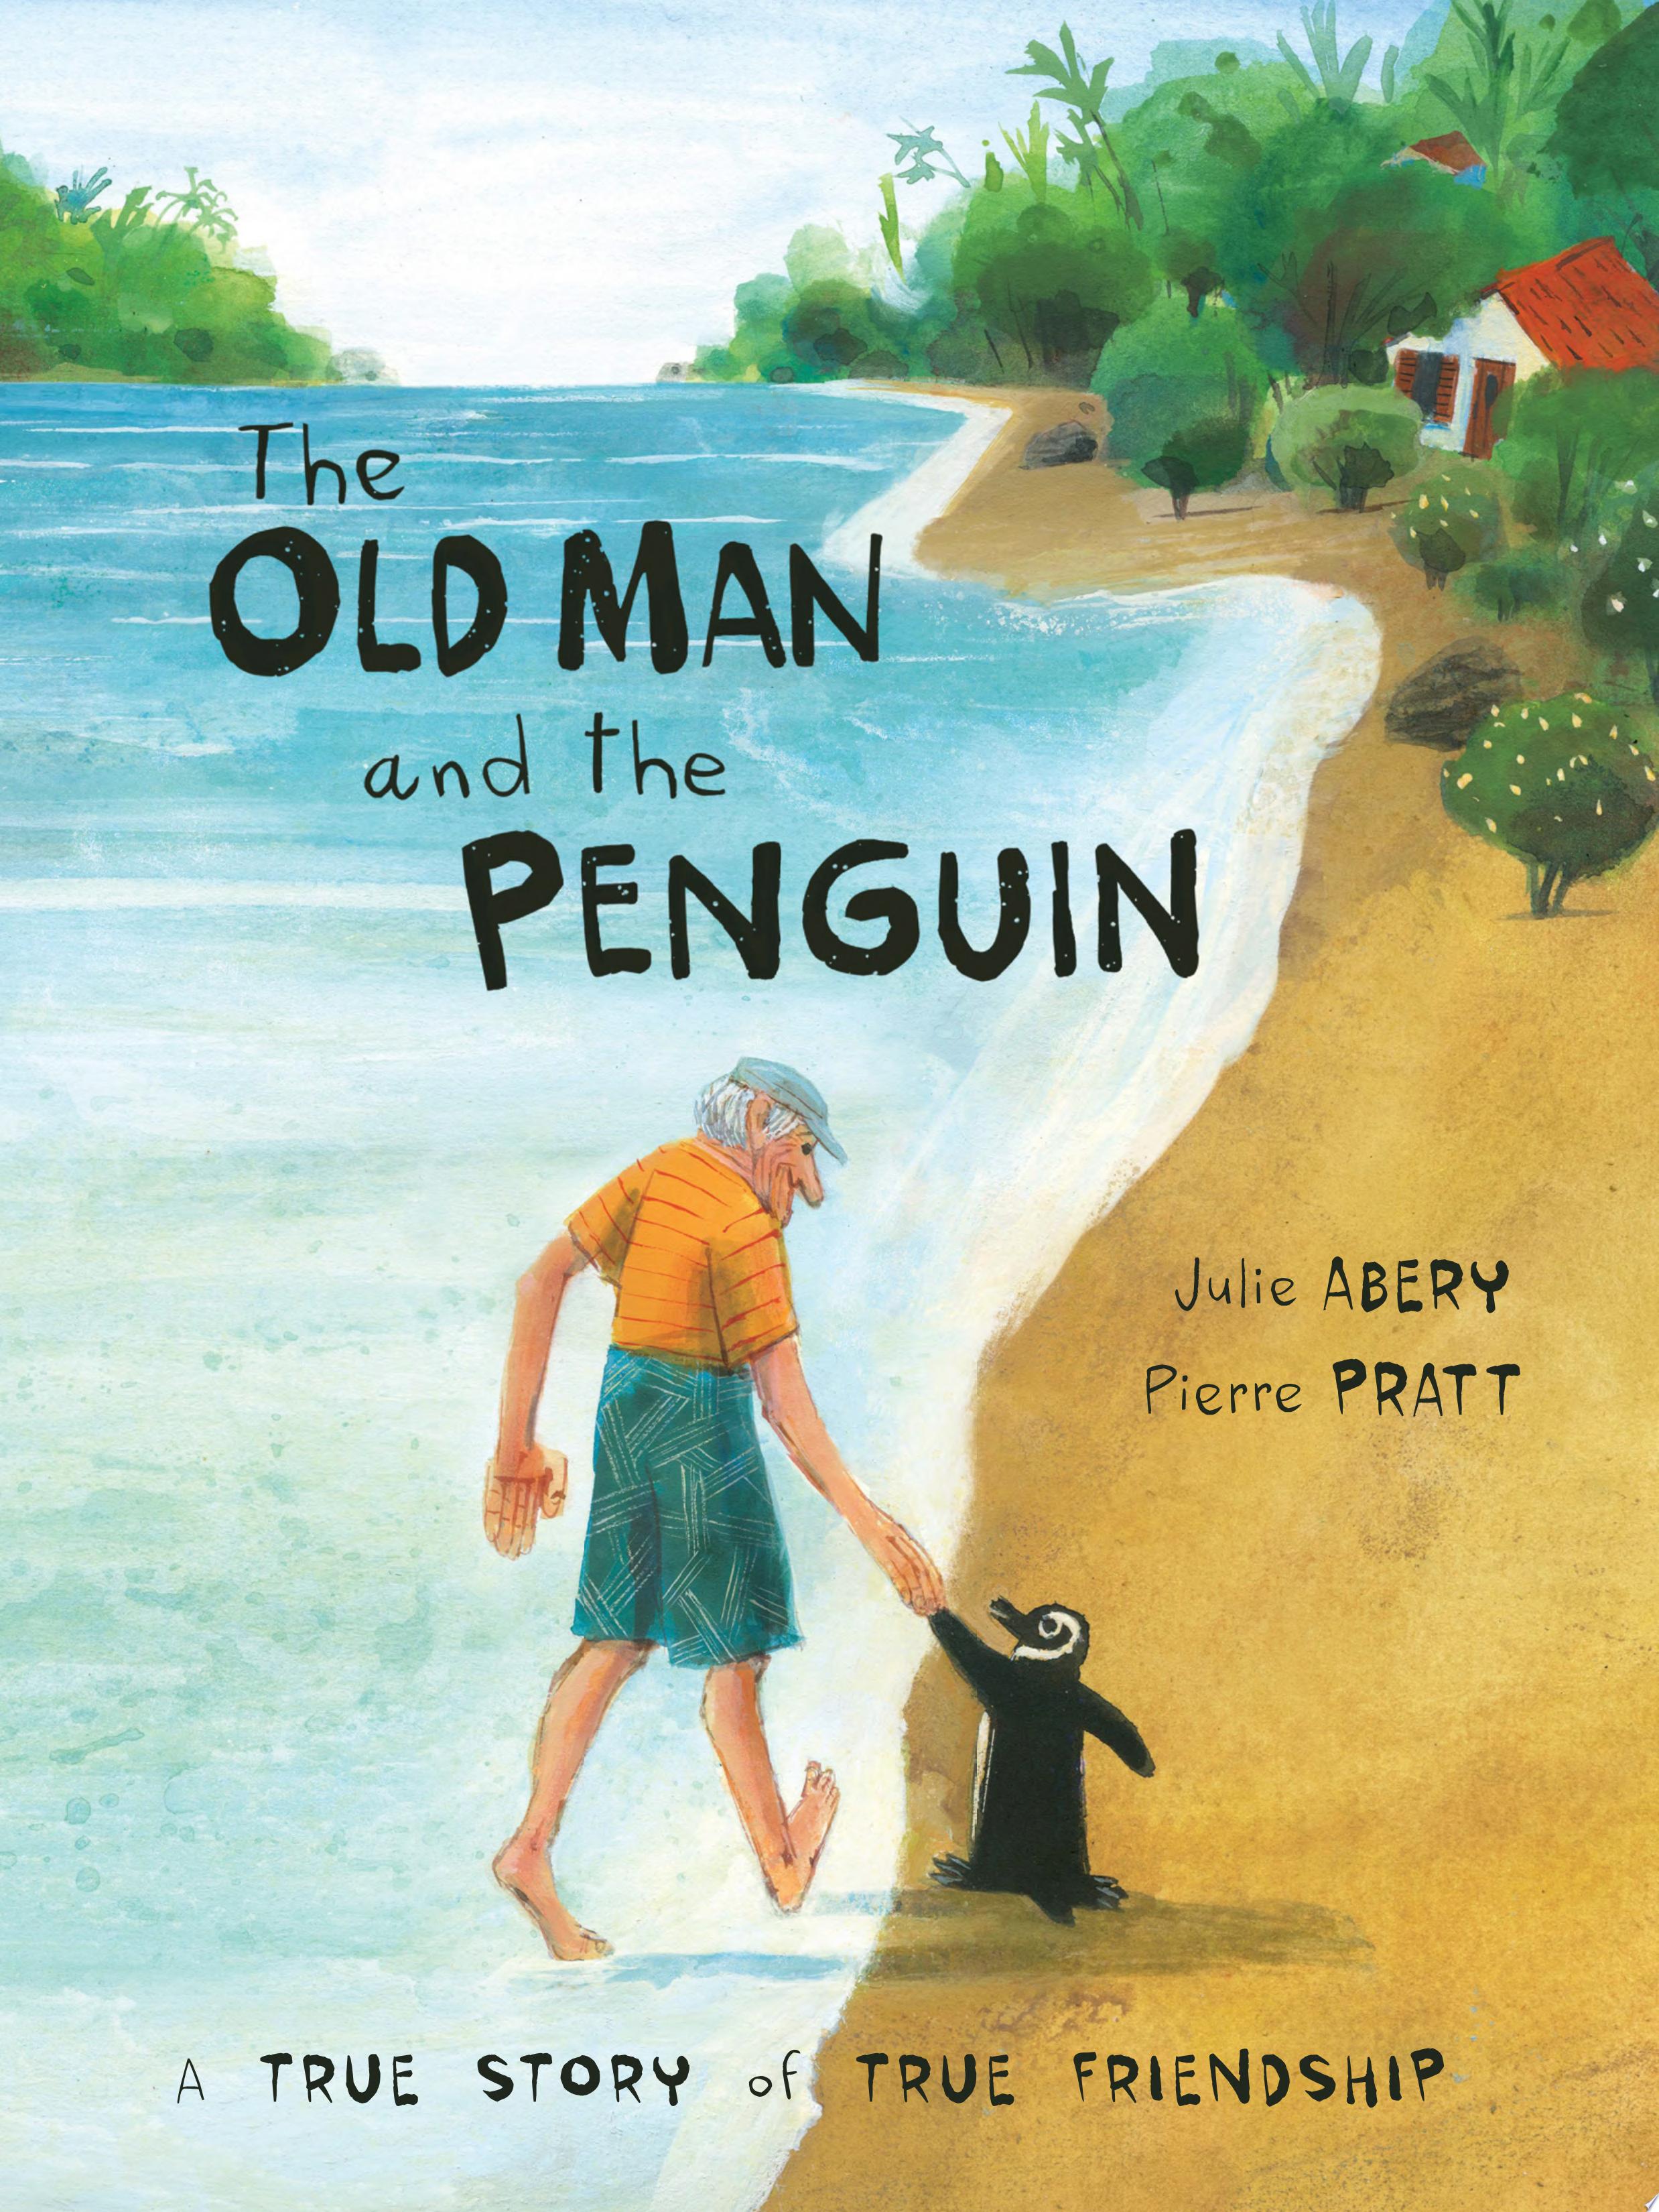 Image for "The Old Man and the Penguin"